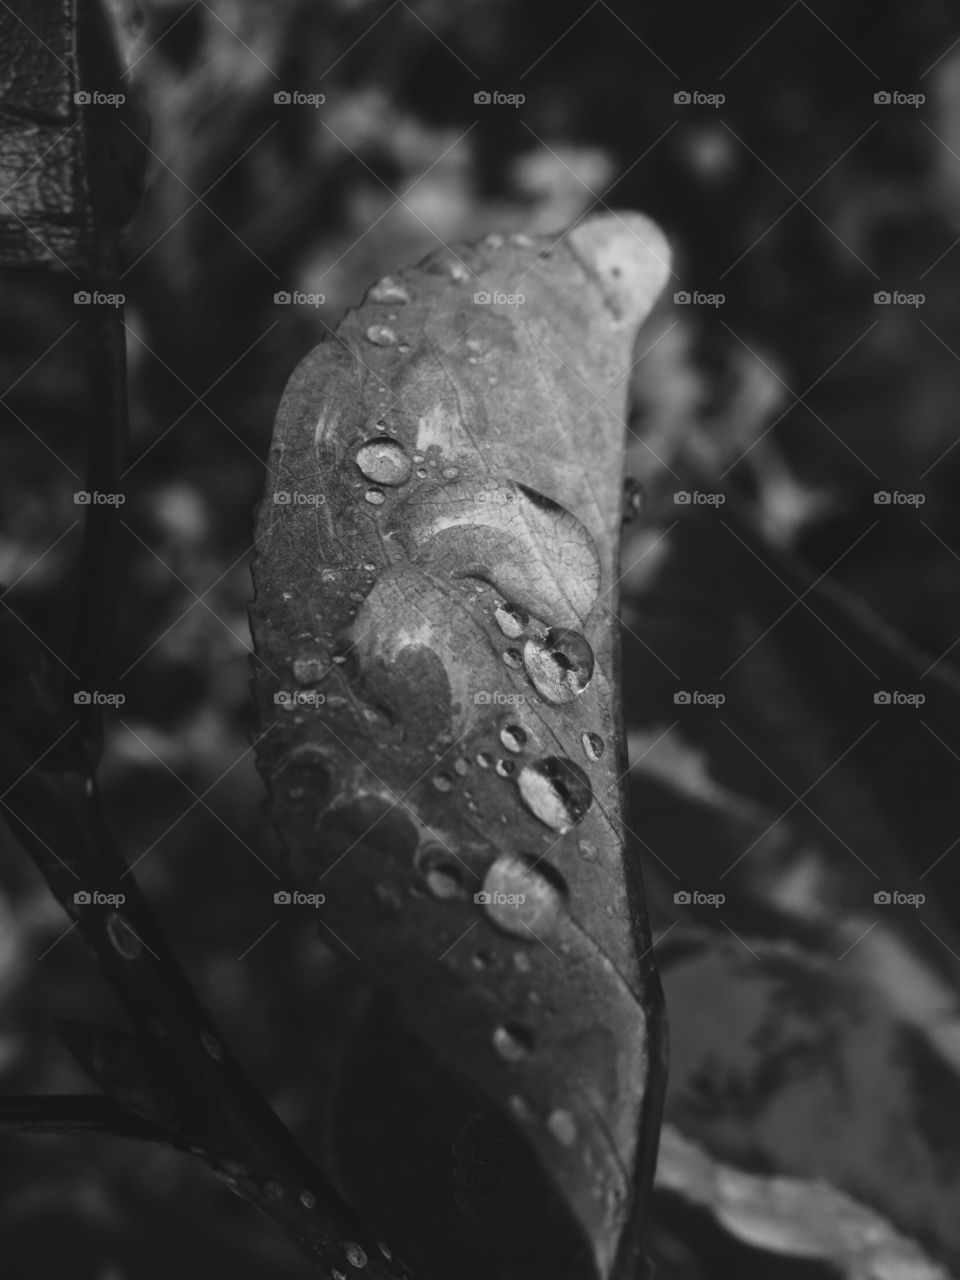 Leaf with water on it in black and white